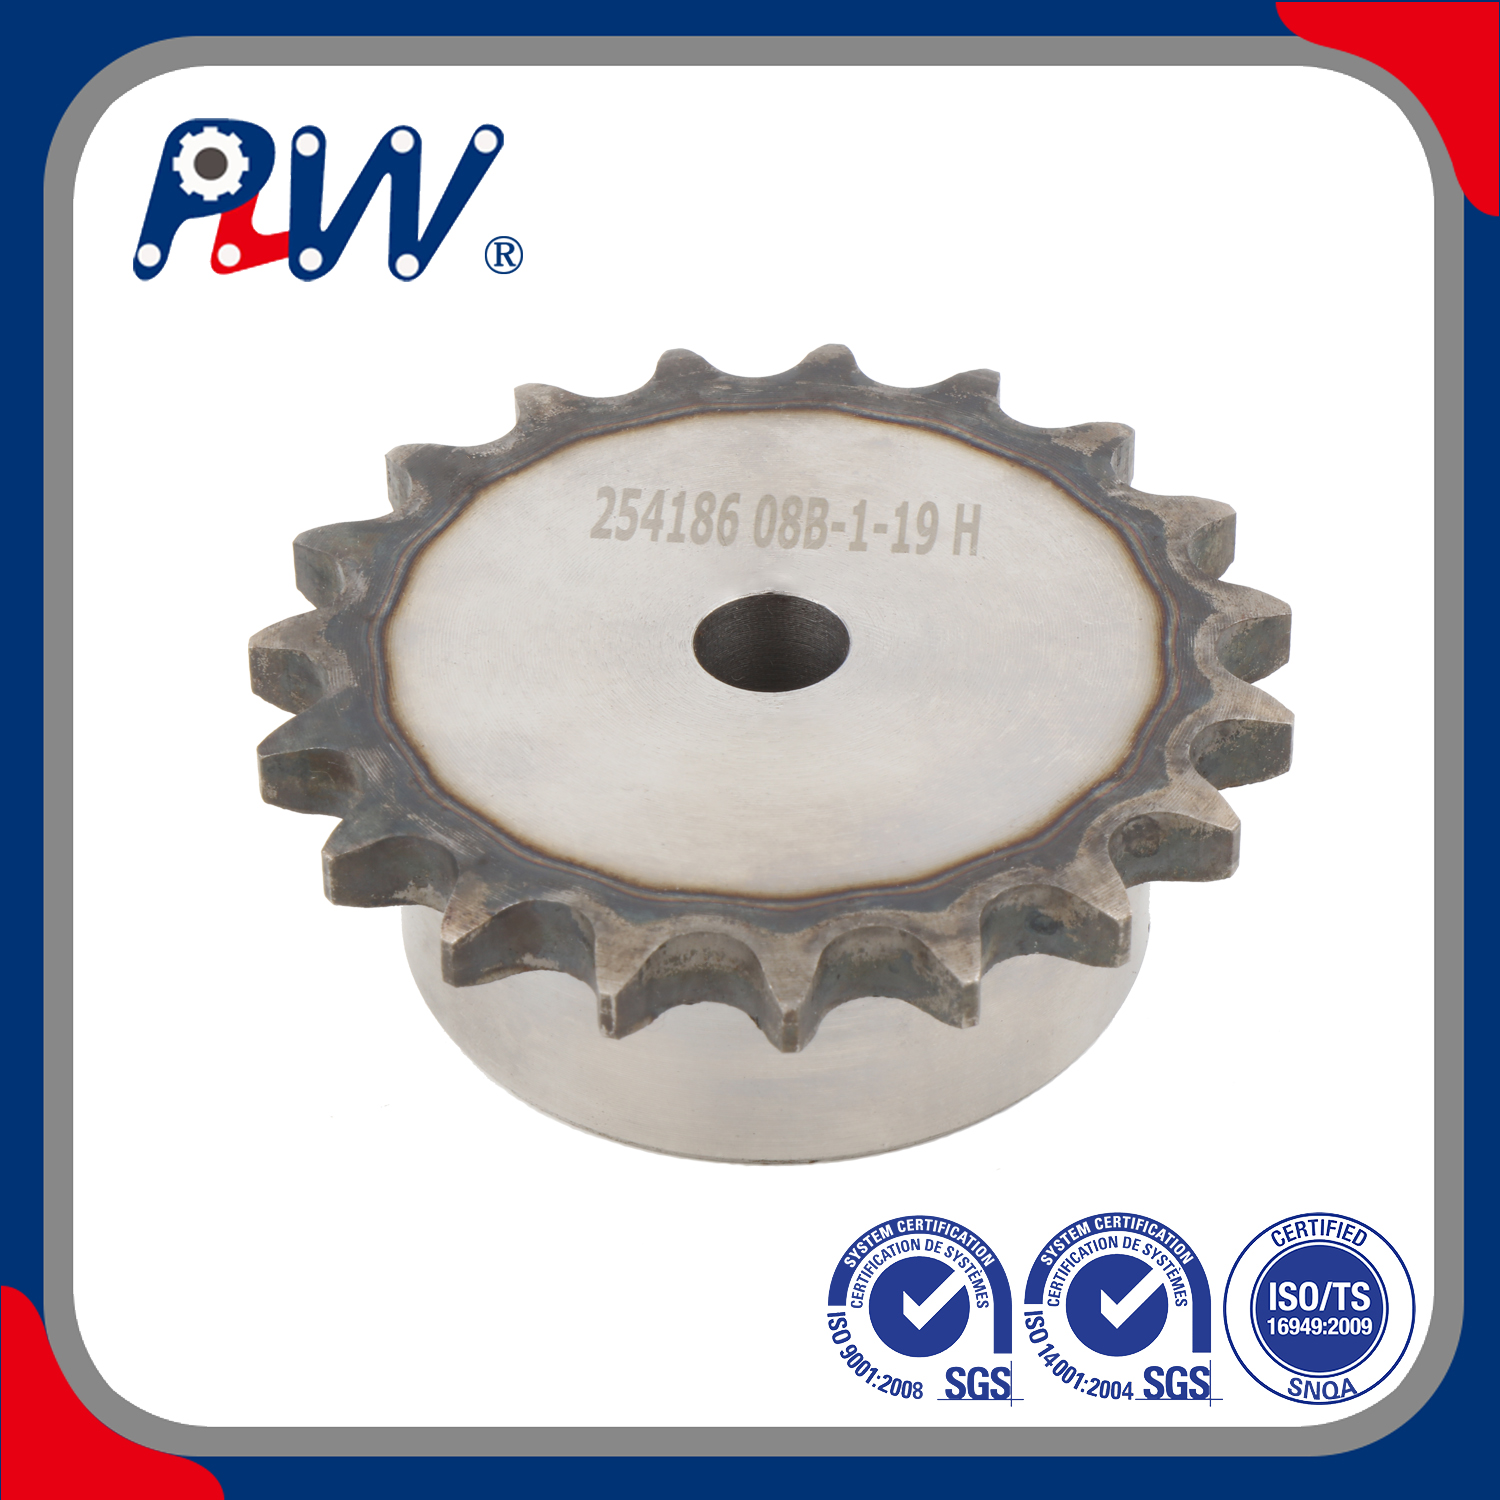 08B-1-19T DIN Standard Teeth Surface Heating Treatment Sprockets for B Series Roller Chain